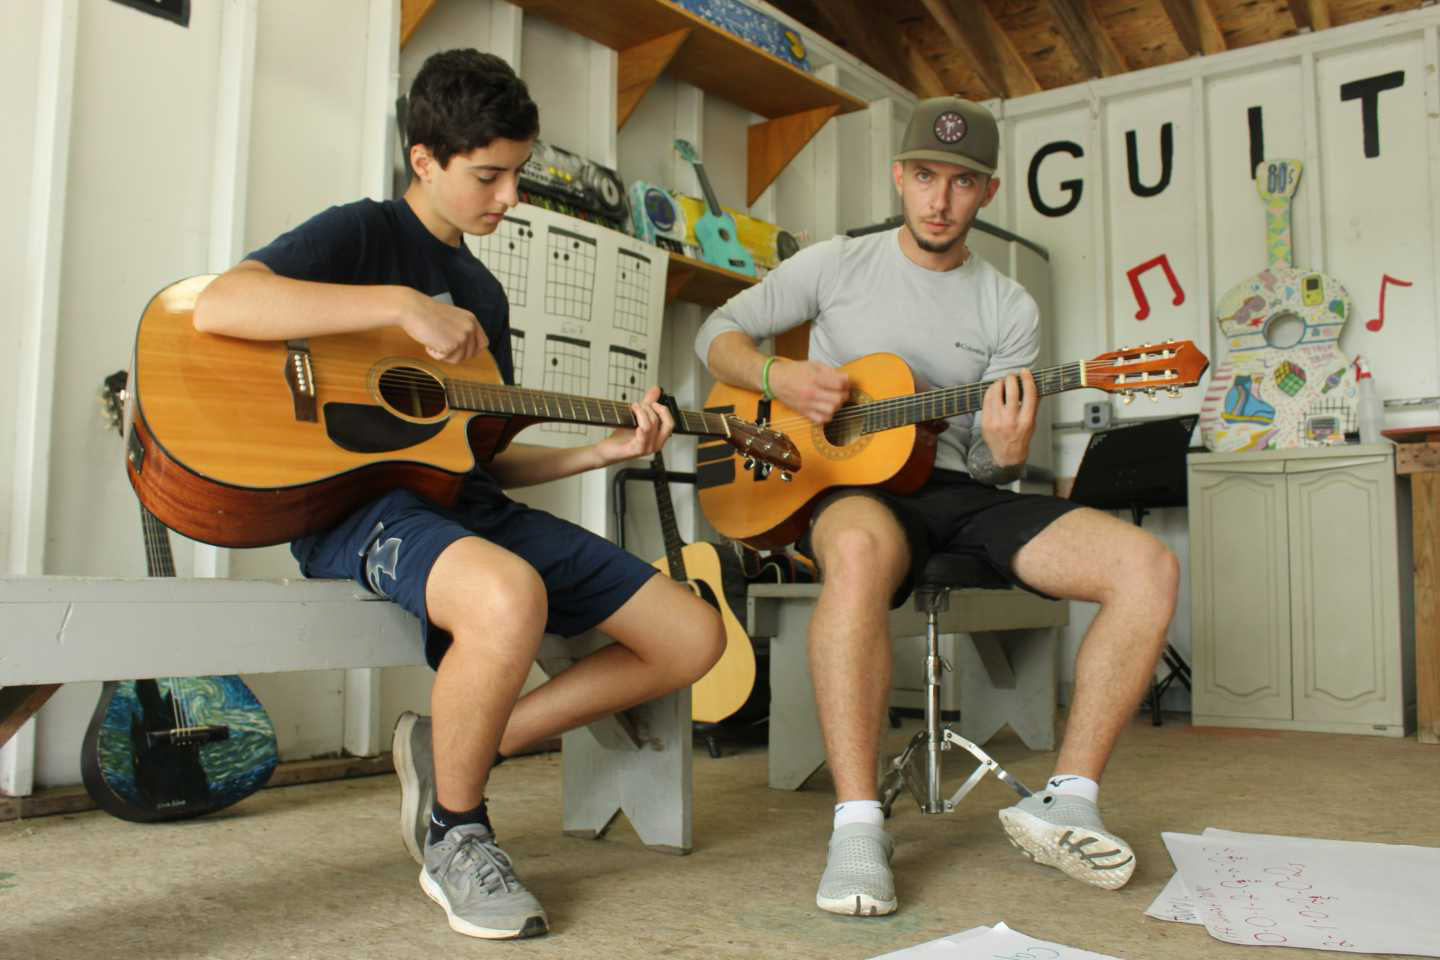 A camper learning how to play guitar.